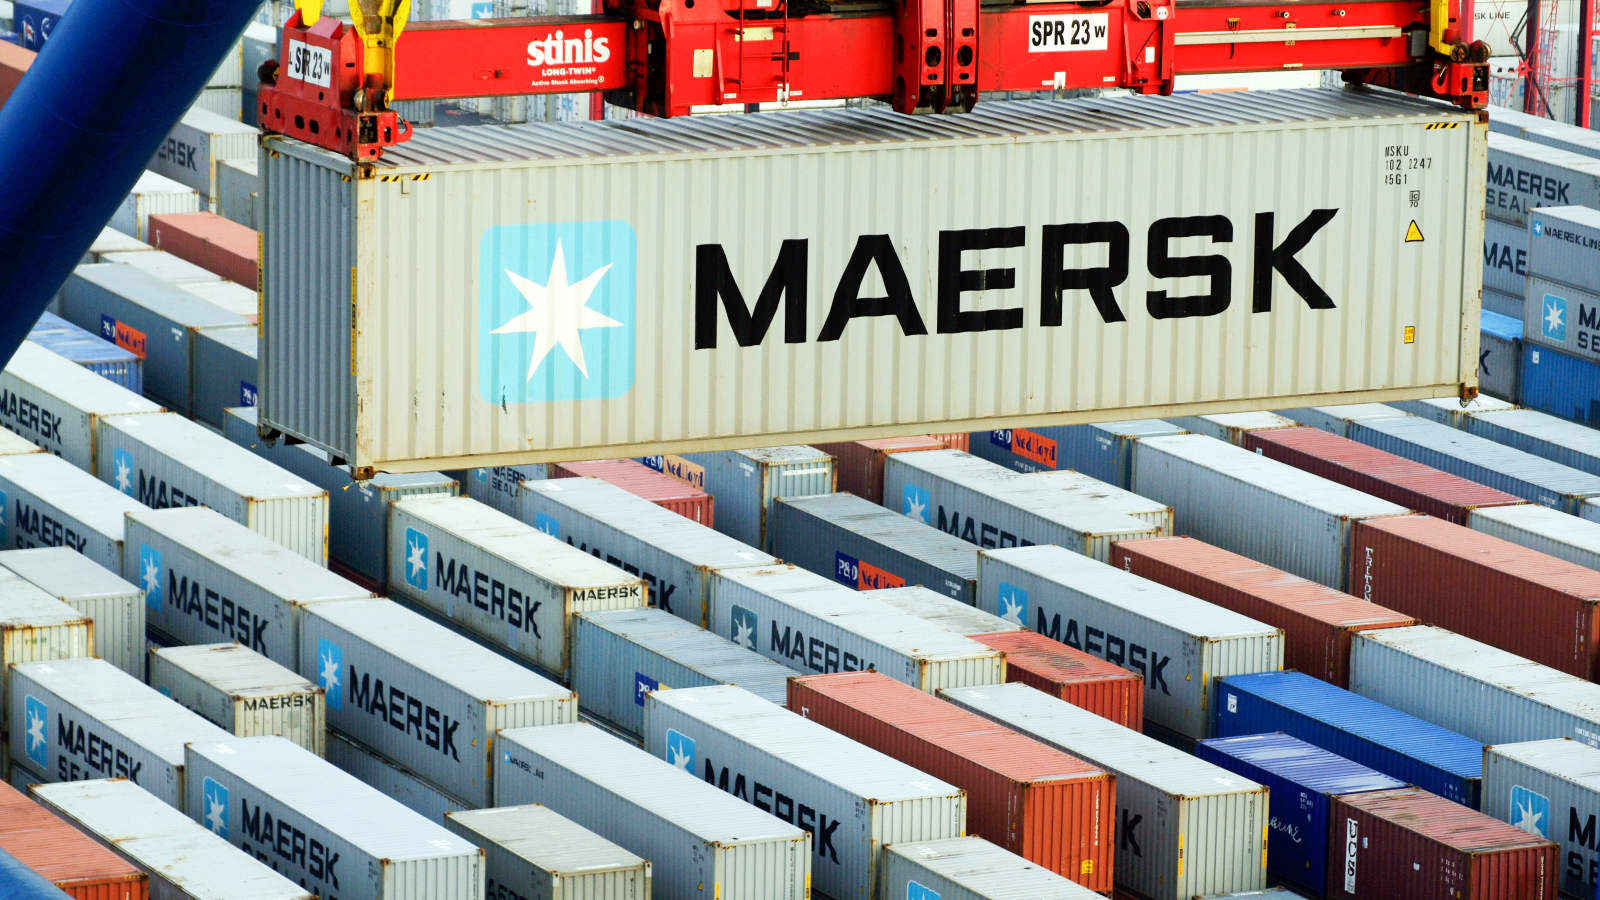 Maersk filed lawsuit against commodity trader Glencore over bad bunkers